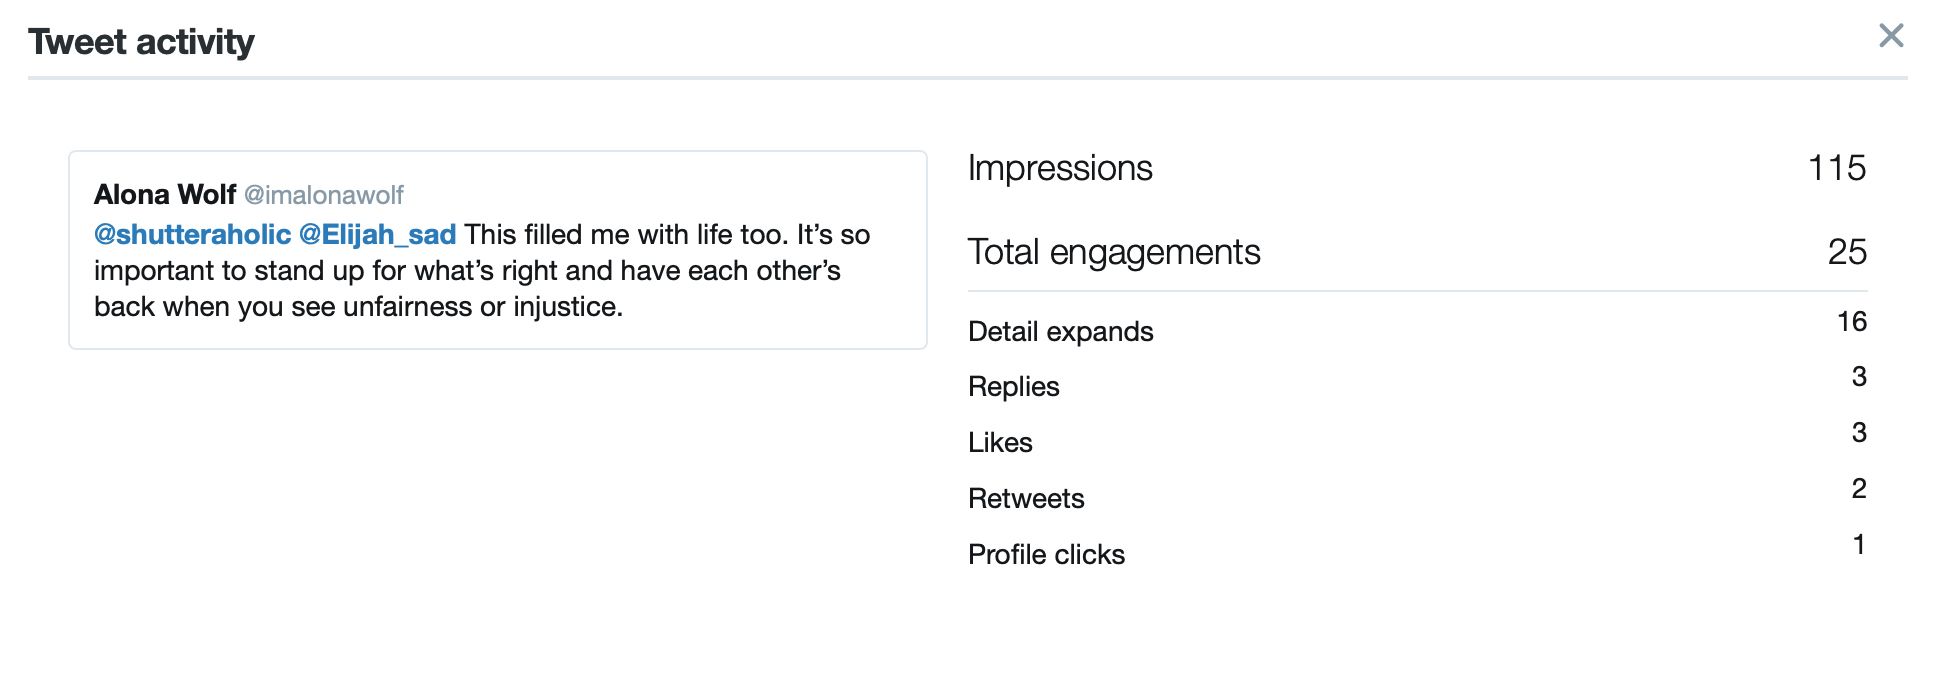 Individual tweet activity showing impressions and engagements